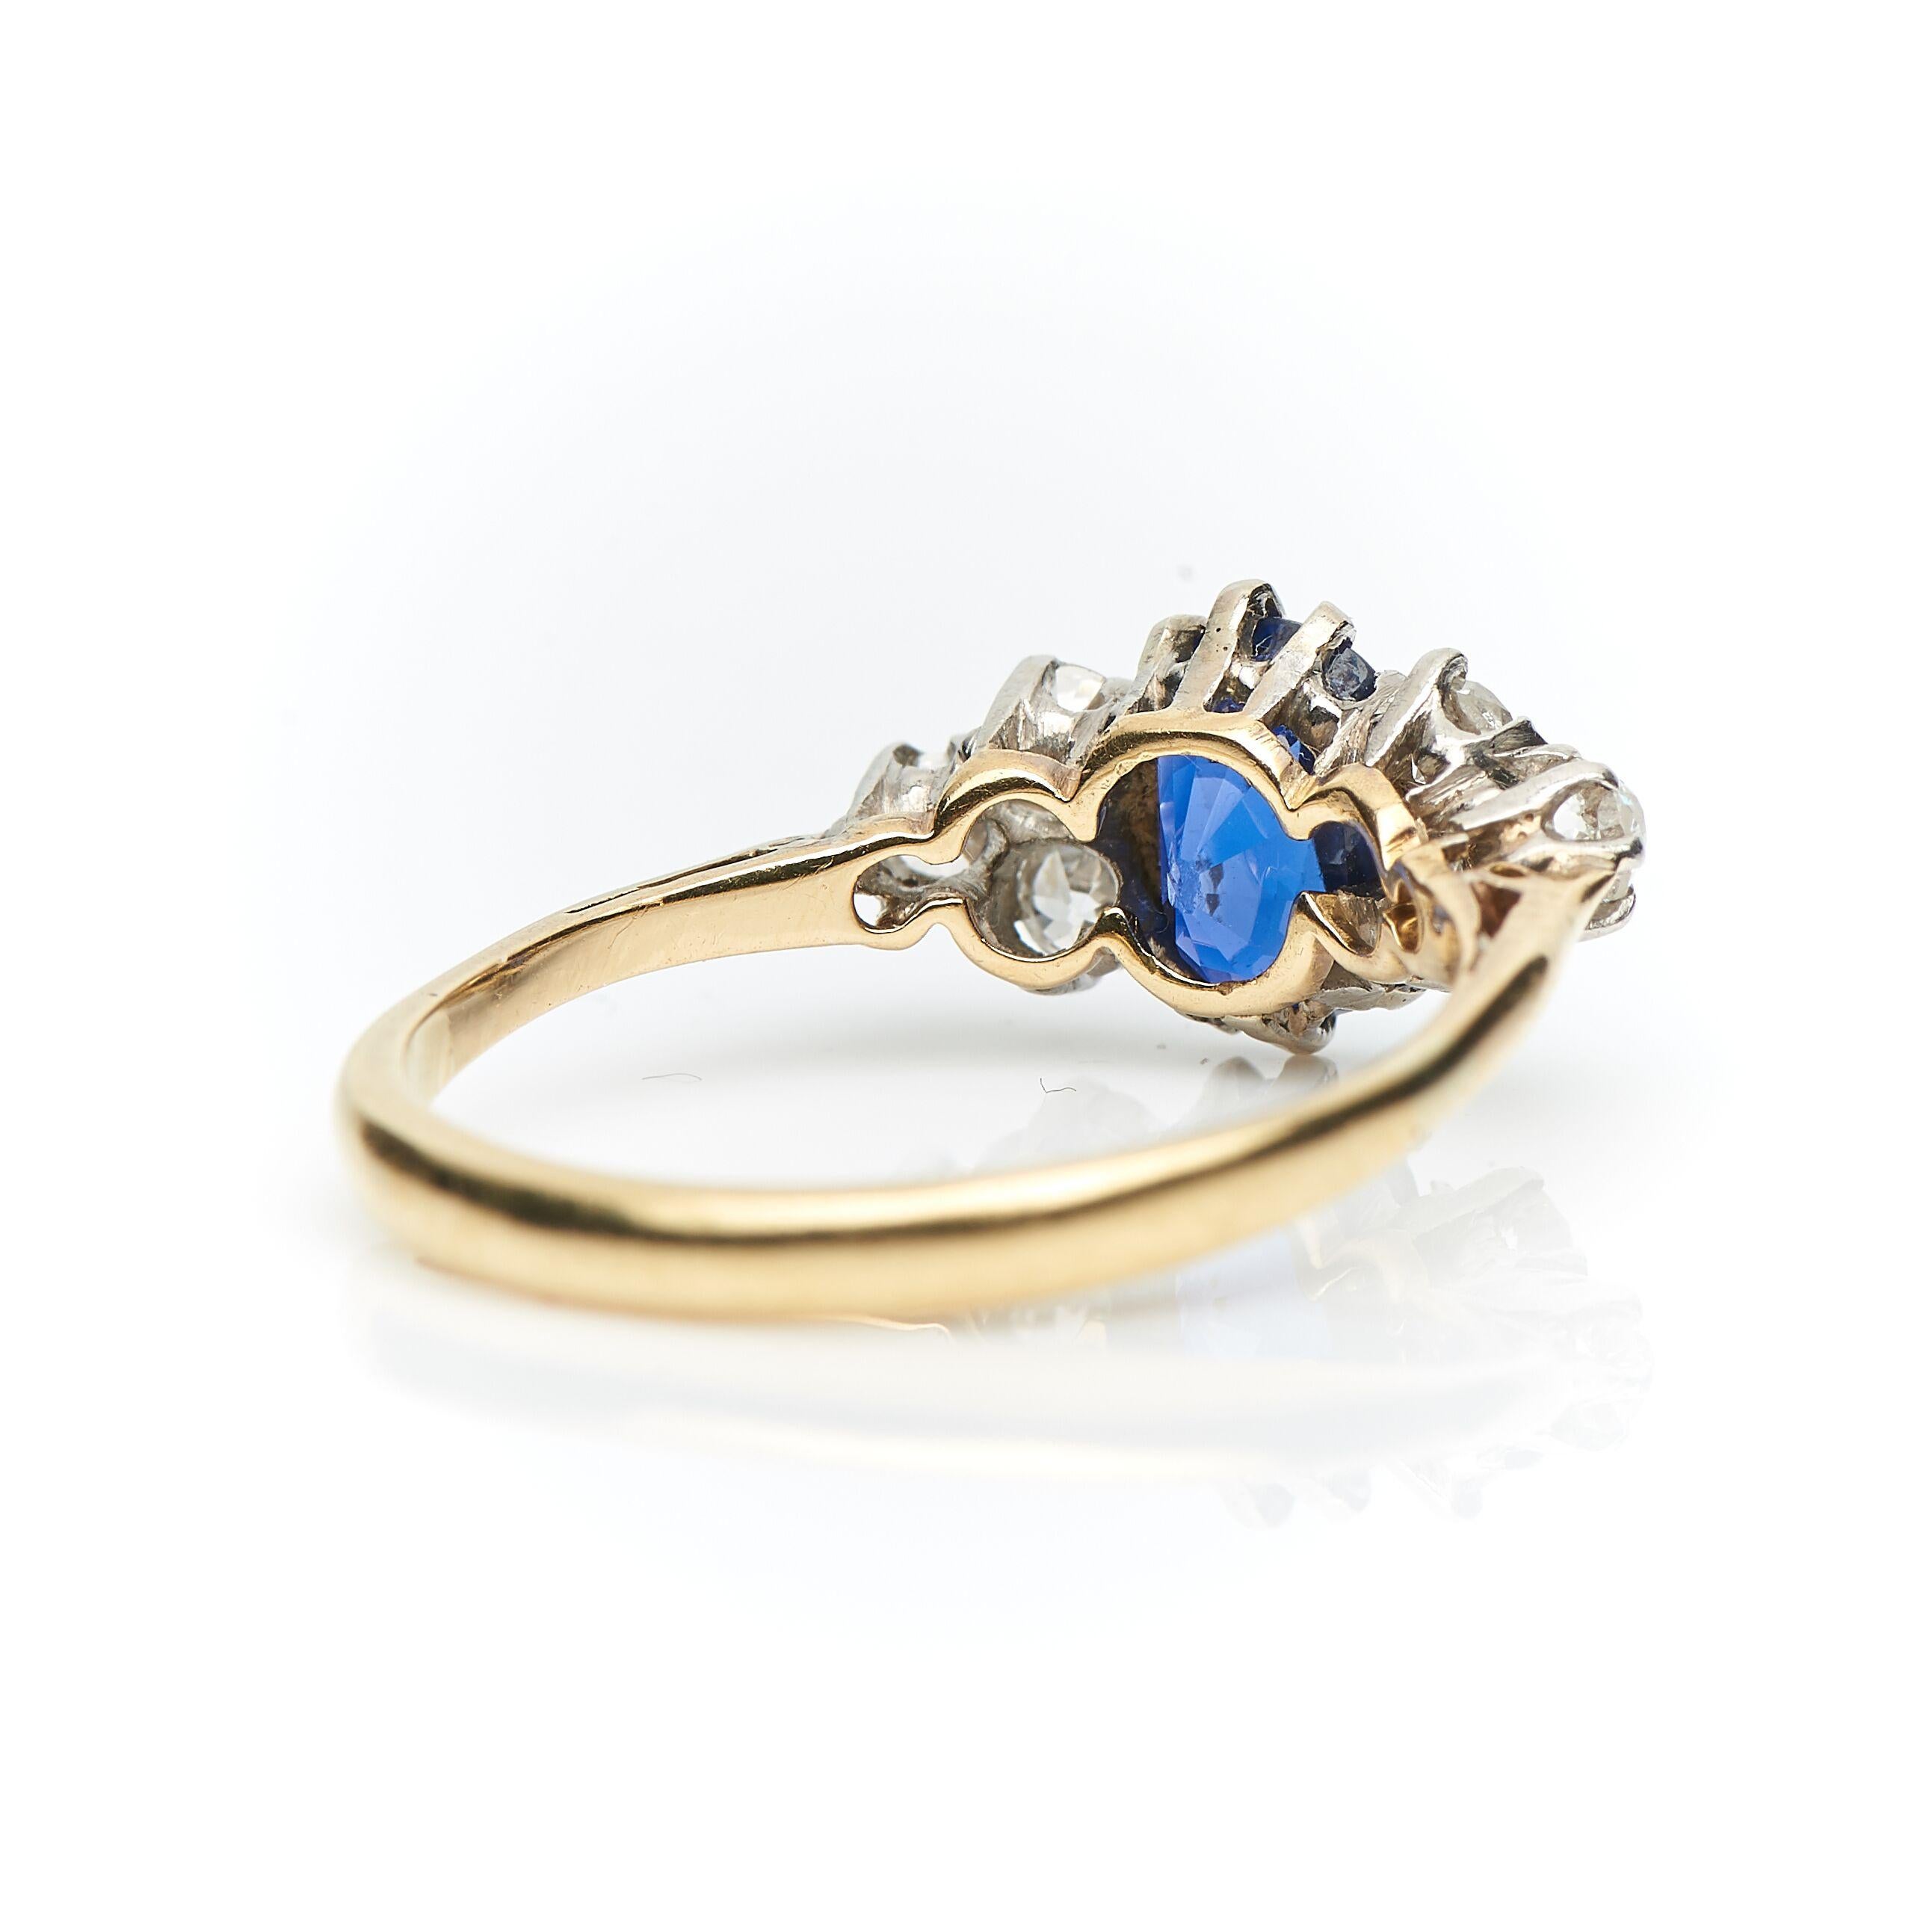 Old Mine Cut Antique, Victorian, 18 Carat Yellow Gold, Sapphire and Diamond Engagement Ring